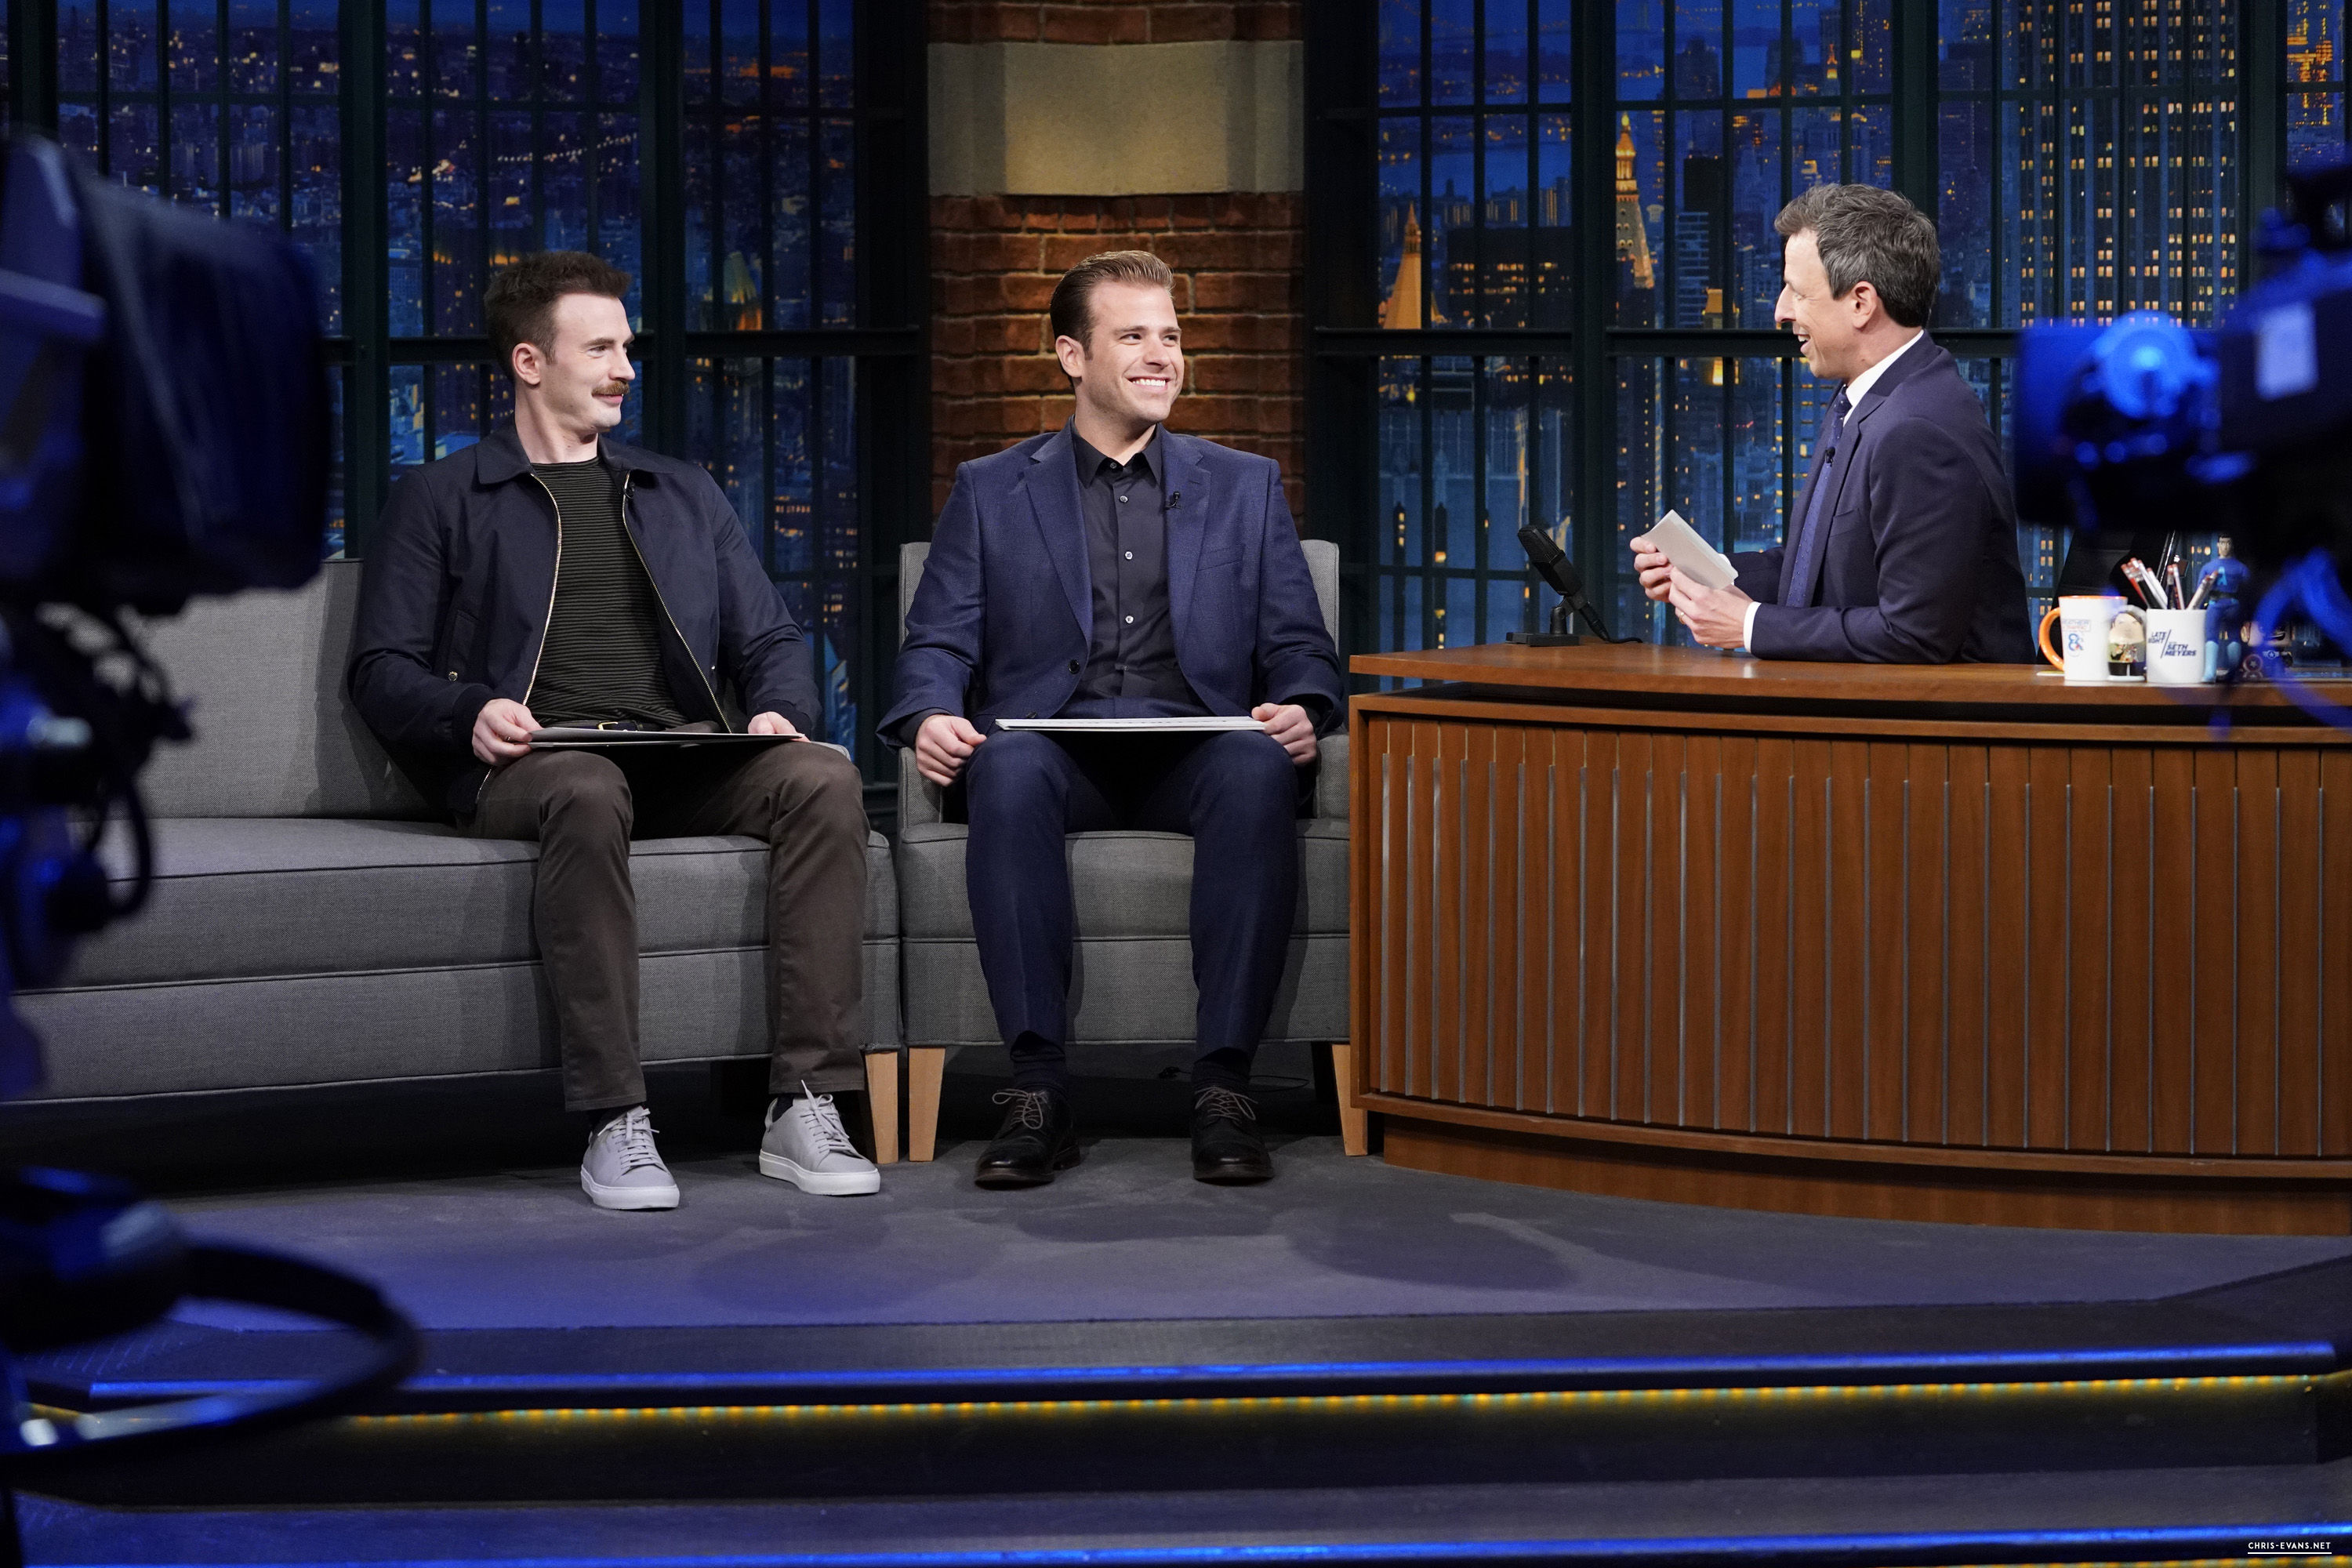 http://chris-evans.net/photos/albums/Appearances/2018/04%2023%20Late%20Night%20with%20Seth%20Meyers/007.jpg